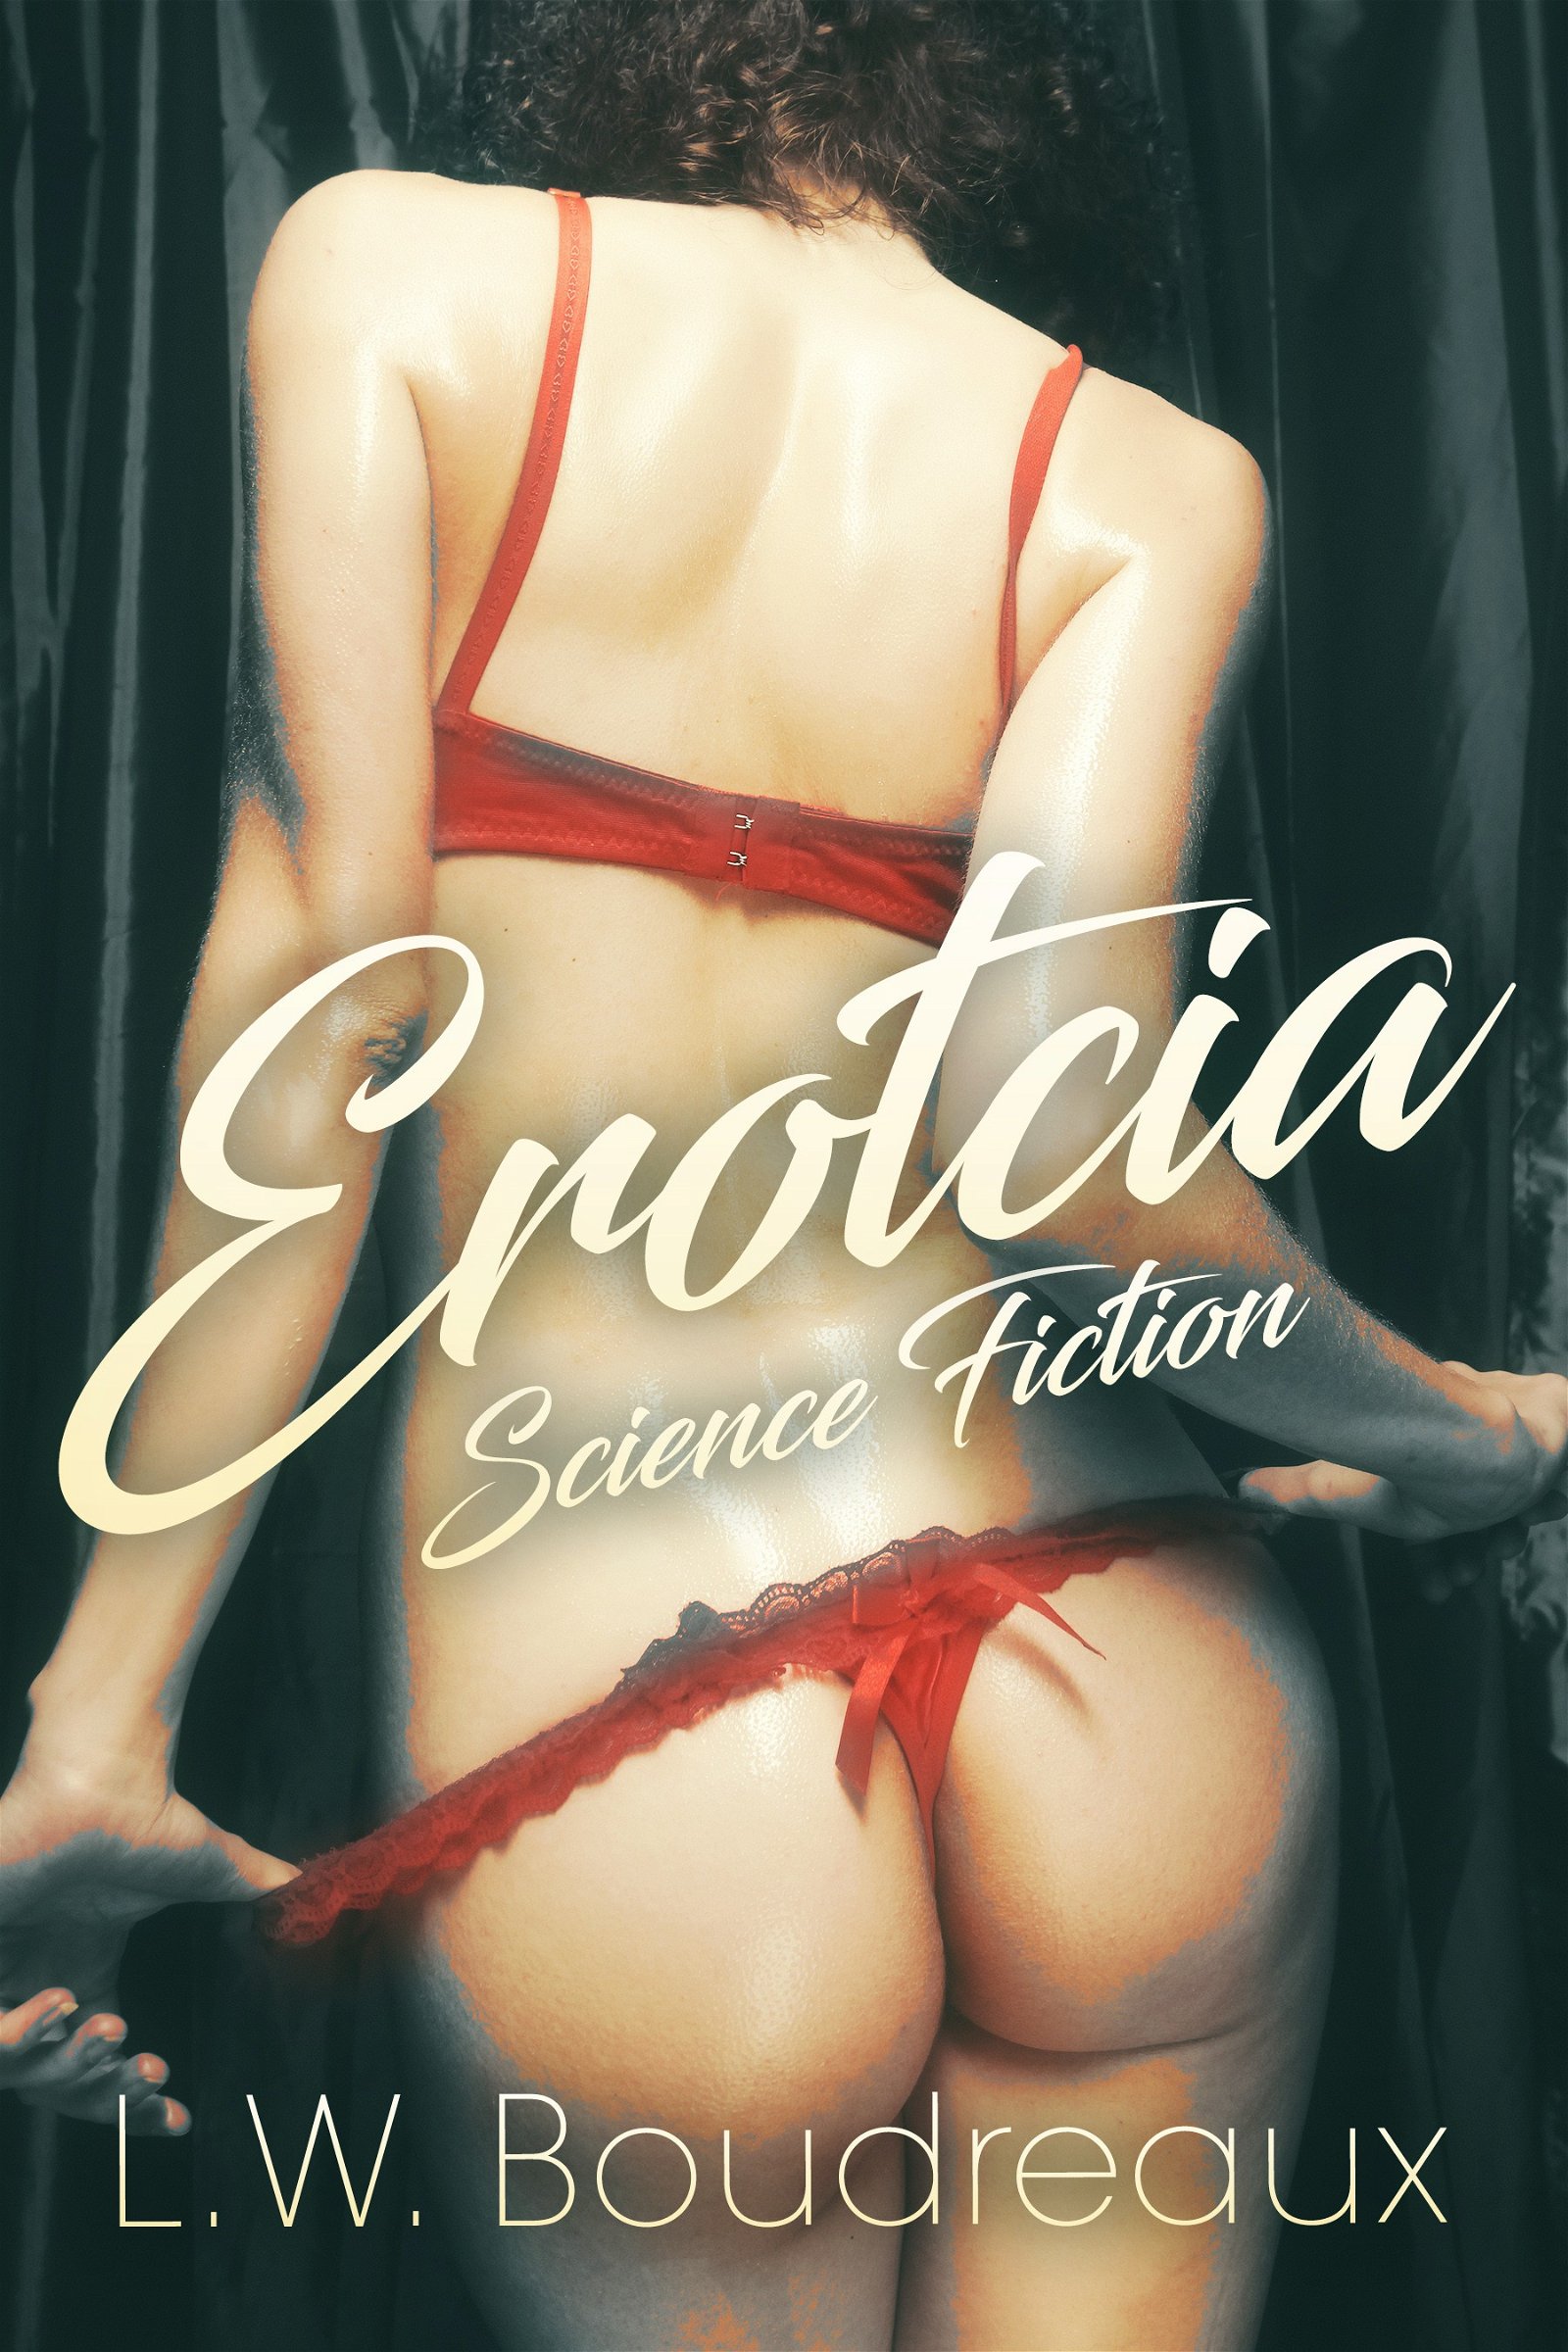 Photo by erotcia with the username @erotcia, who is a verified user,  May 27, 2020 at 9:31 AM. The post is about the topic Erotcia: Erotica books by LW Boudreaux and the text says 'WOULD YOU BANG A ROBOT?

The girls of Erotcia Science Fiction would, and they do... ALL NIGHT LONG!!!

Cum get you some!!

https://amzn.to/3c01eEw

Check out more of the books at https://www.erotcia.com

#erotica #eroticabooks #eroticastory..'